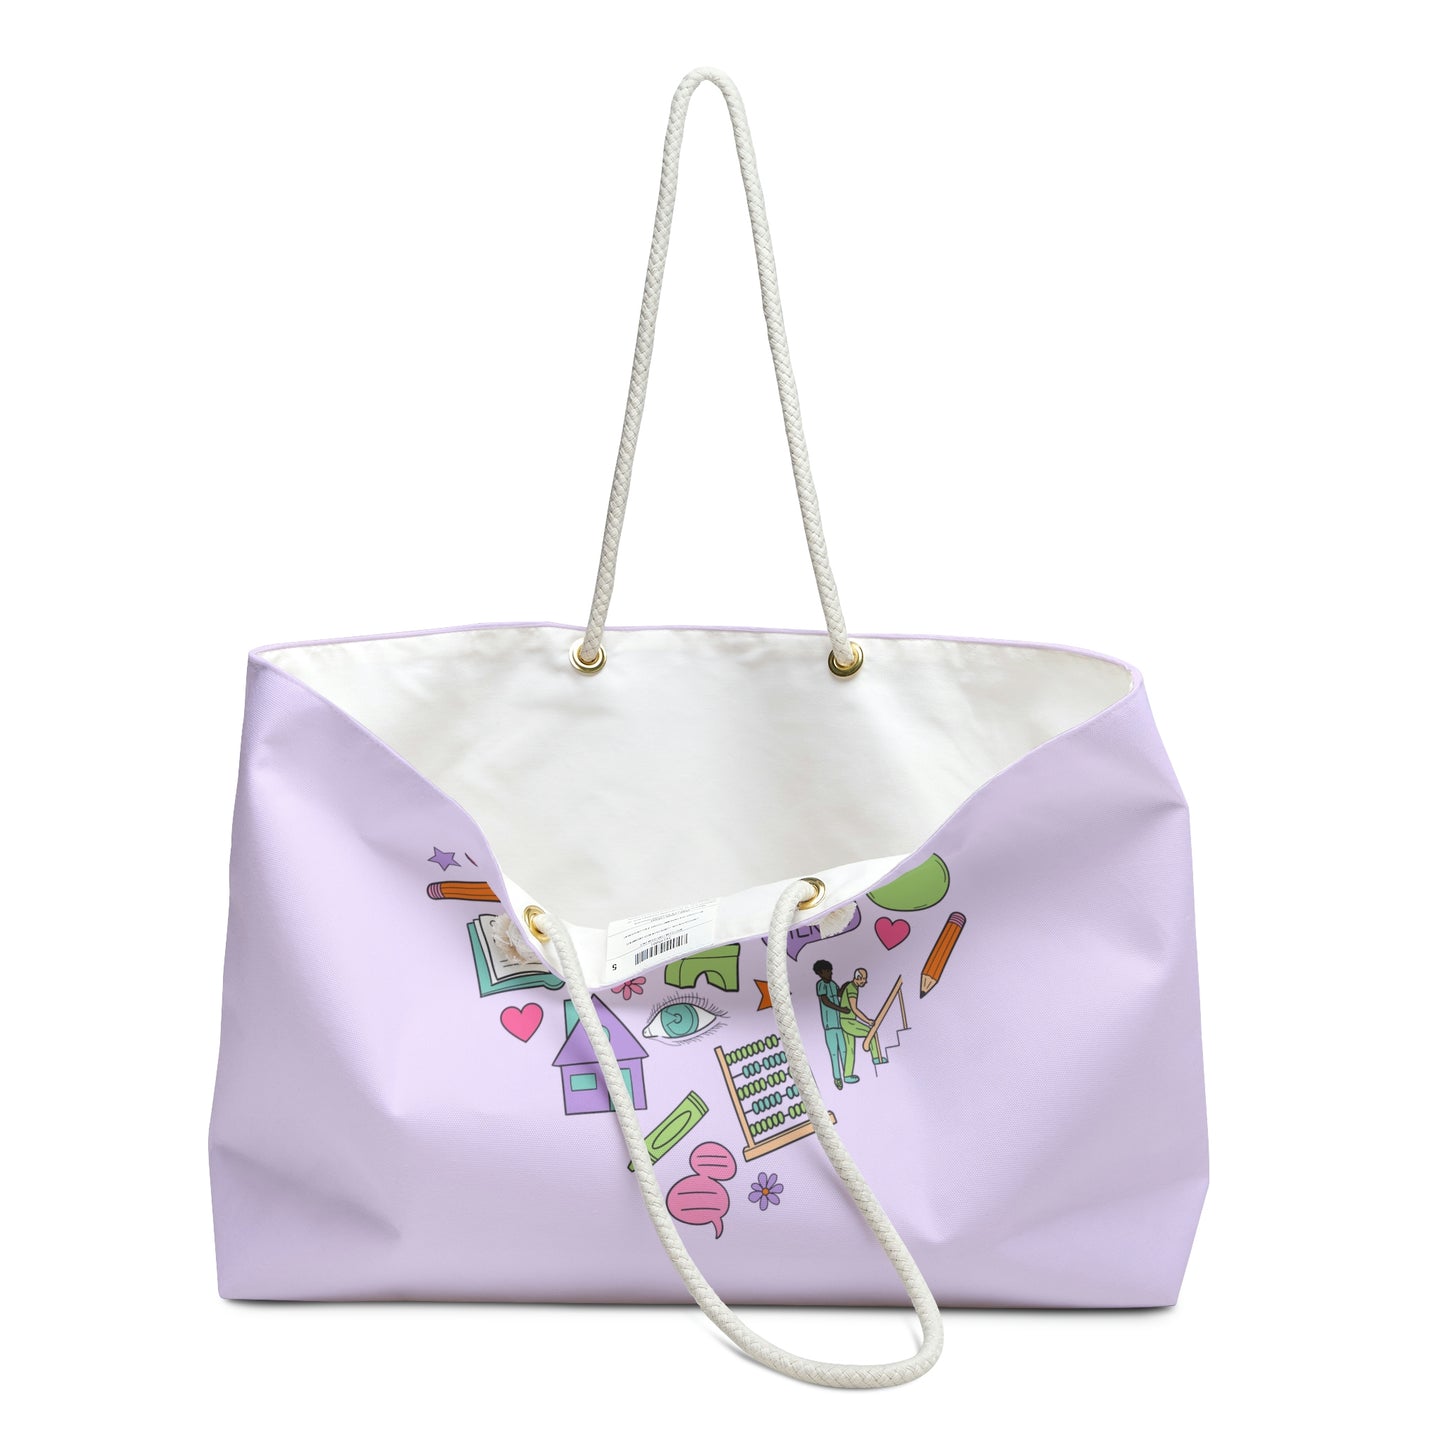 Occupational Therapy Essentials Oversized Therapy Tote